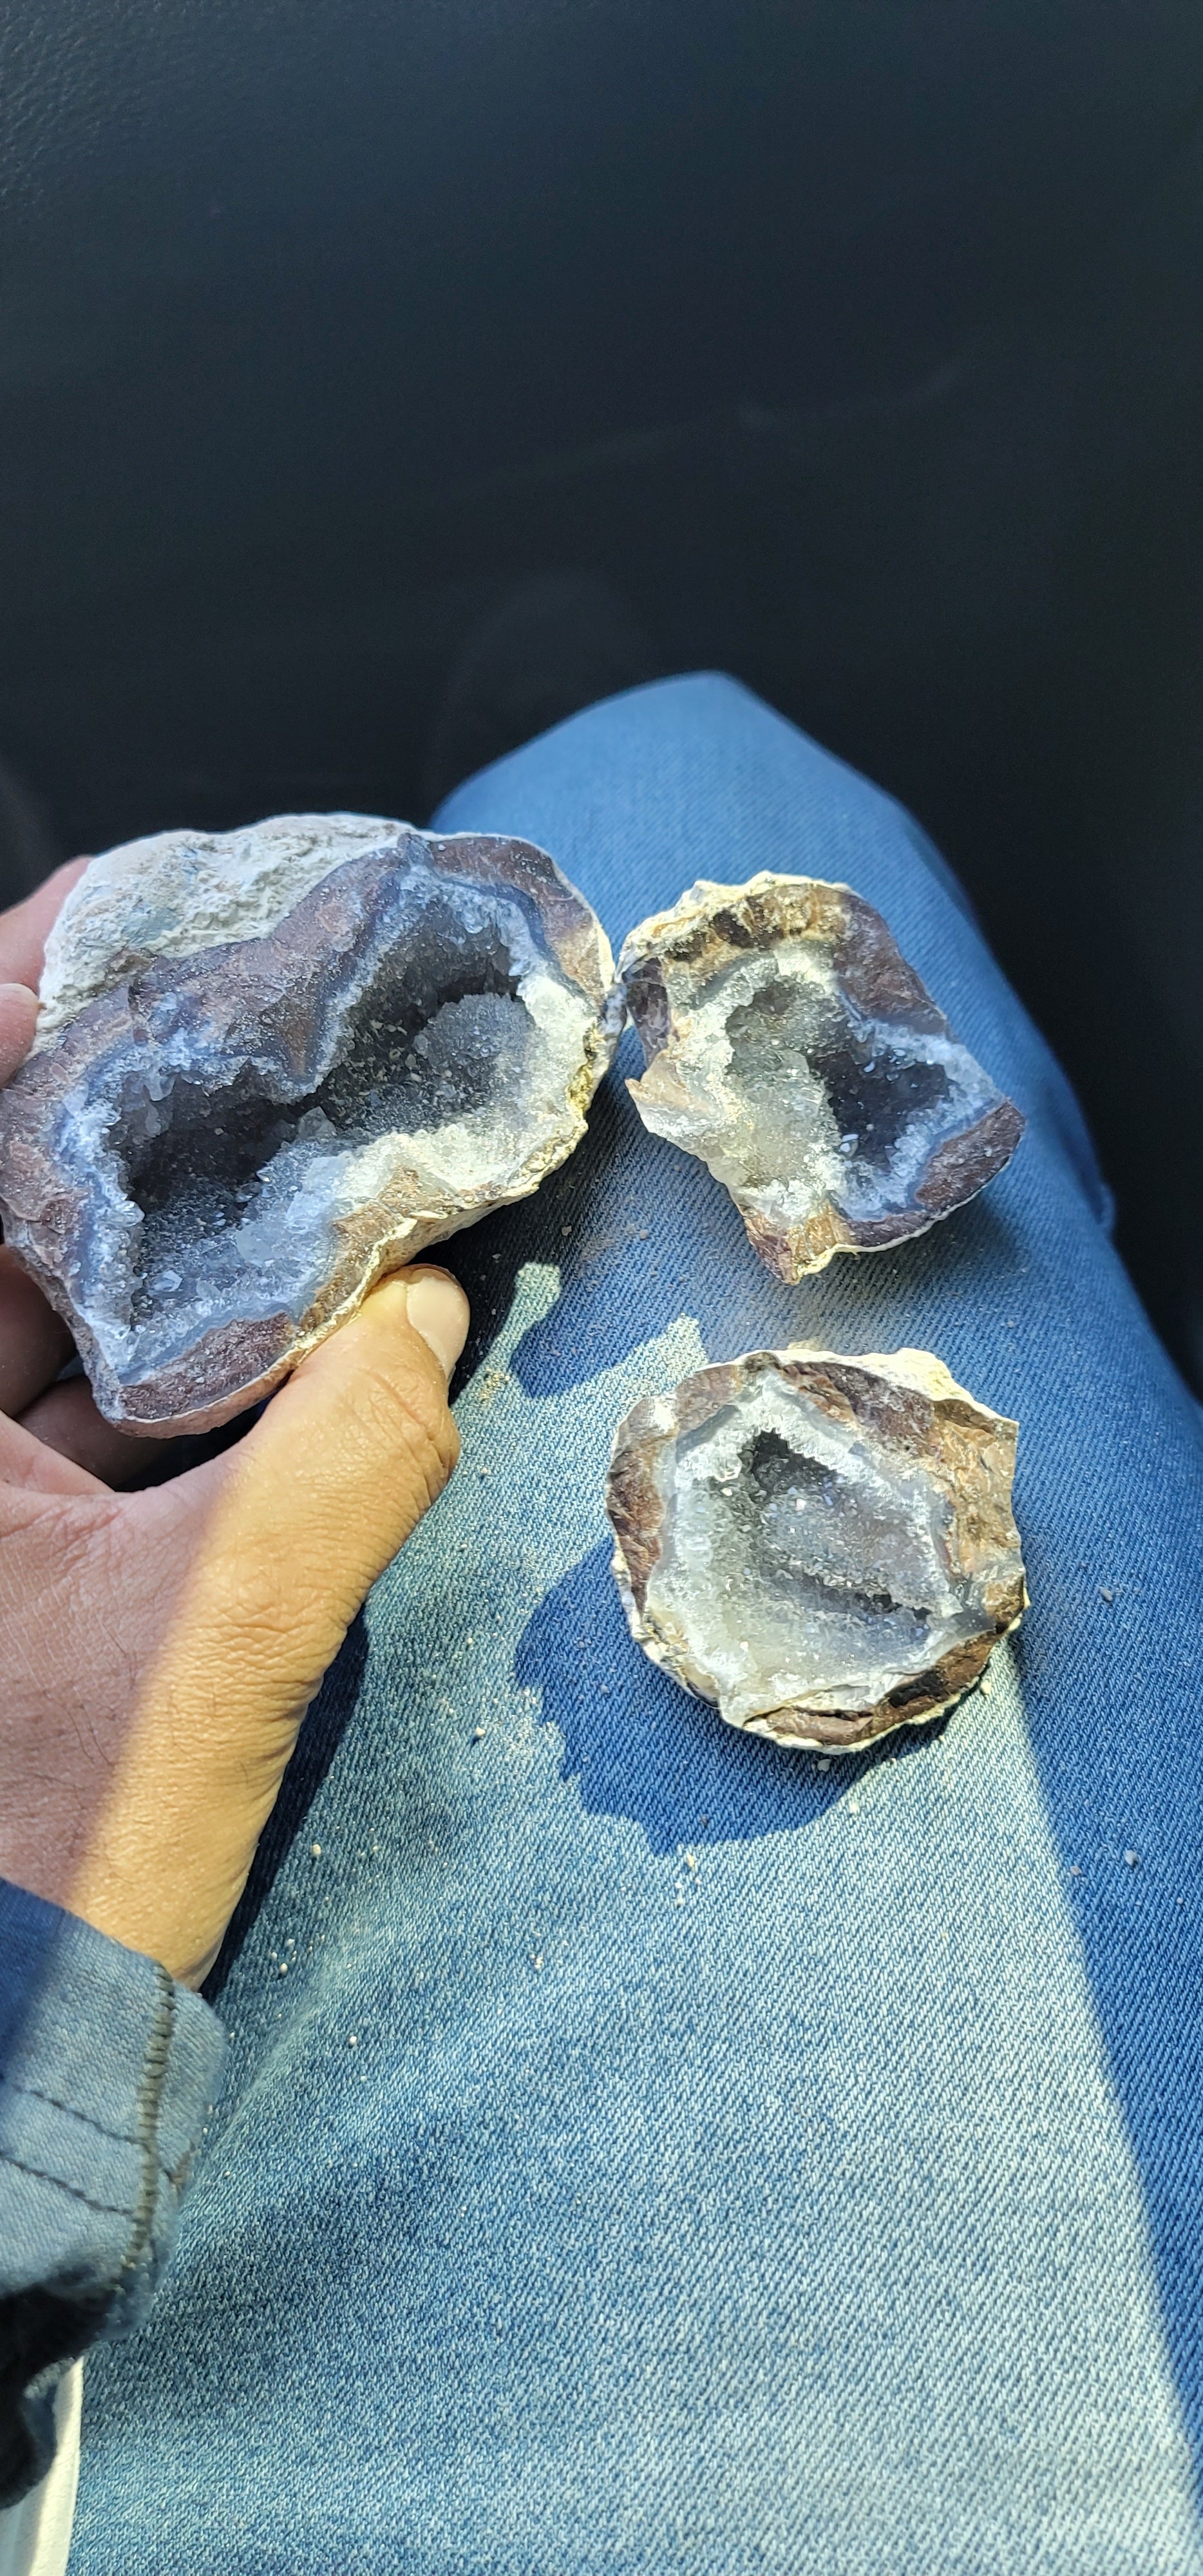 Camper submitted image from BLM - Dugway Geode Beds - Utah - 3